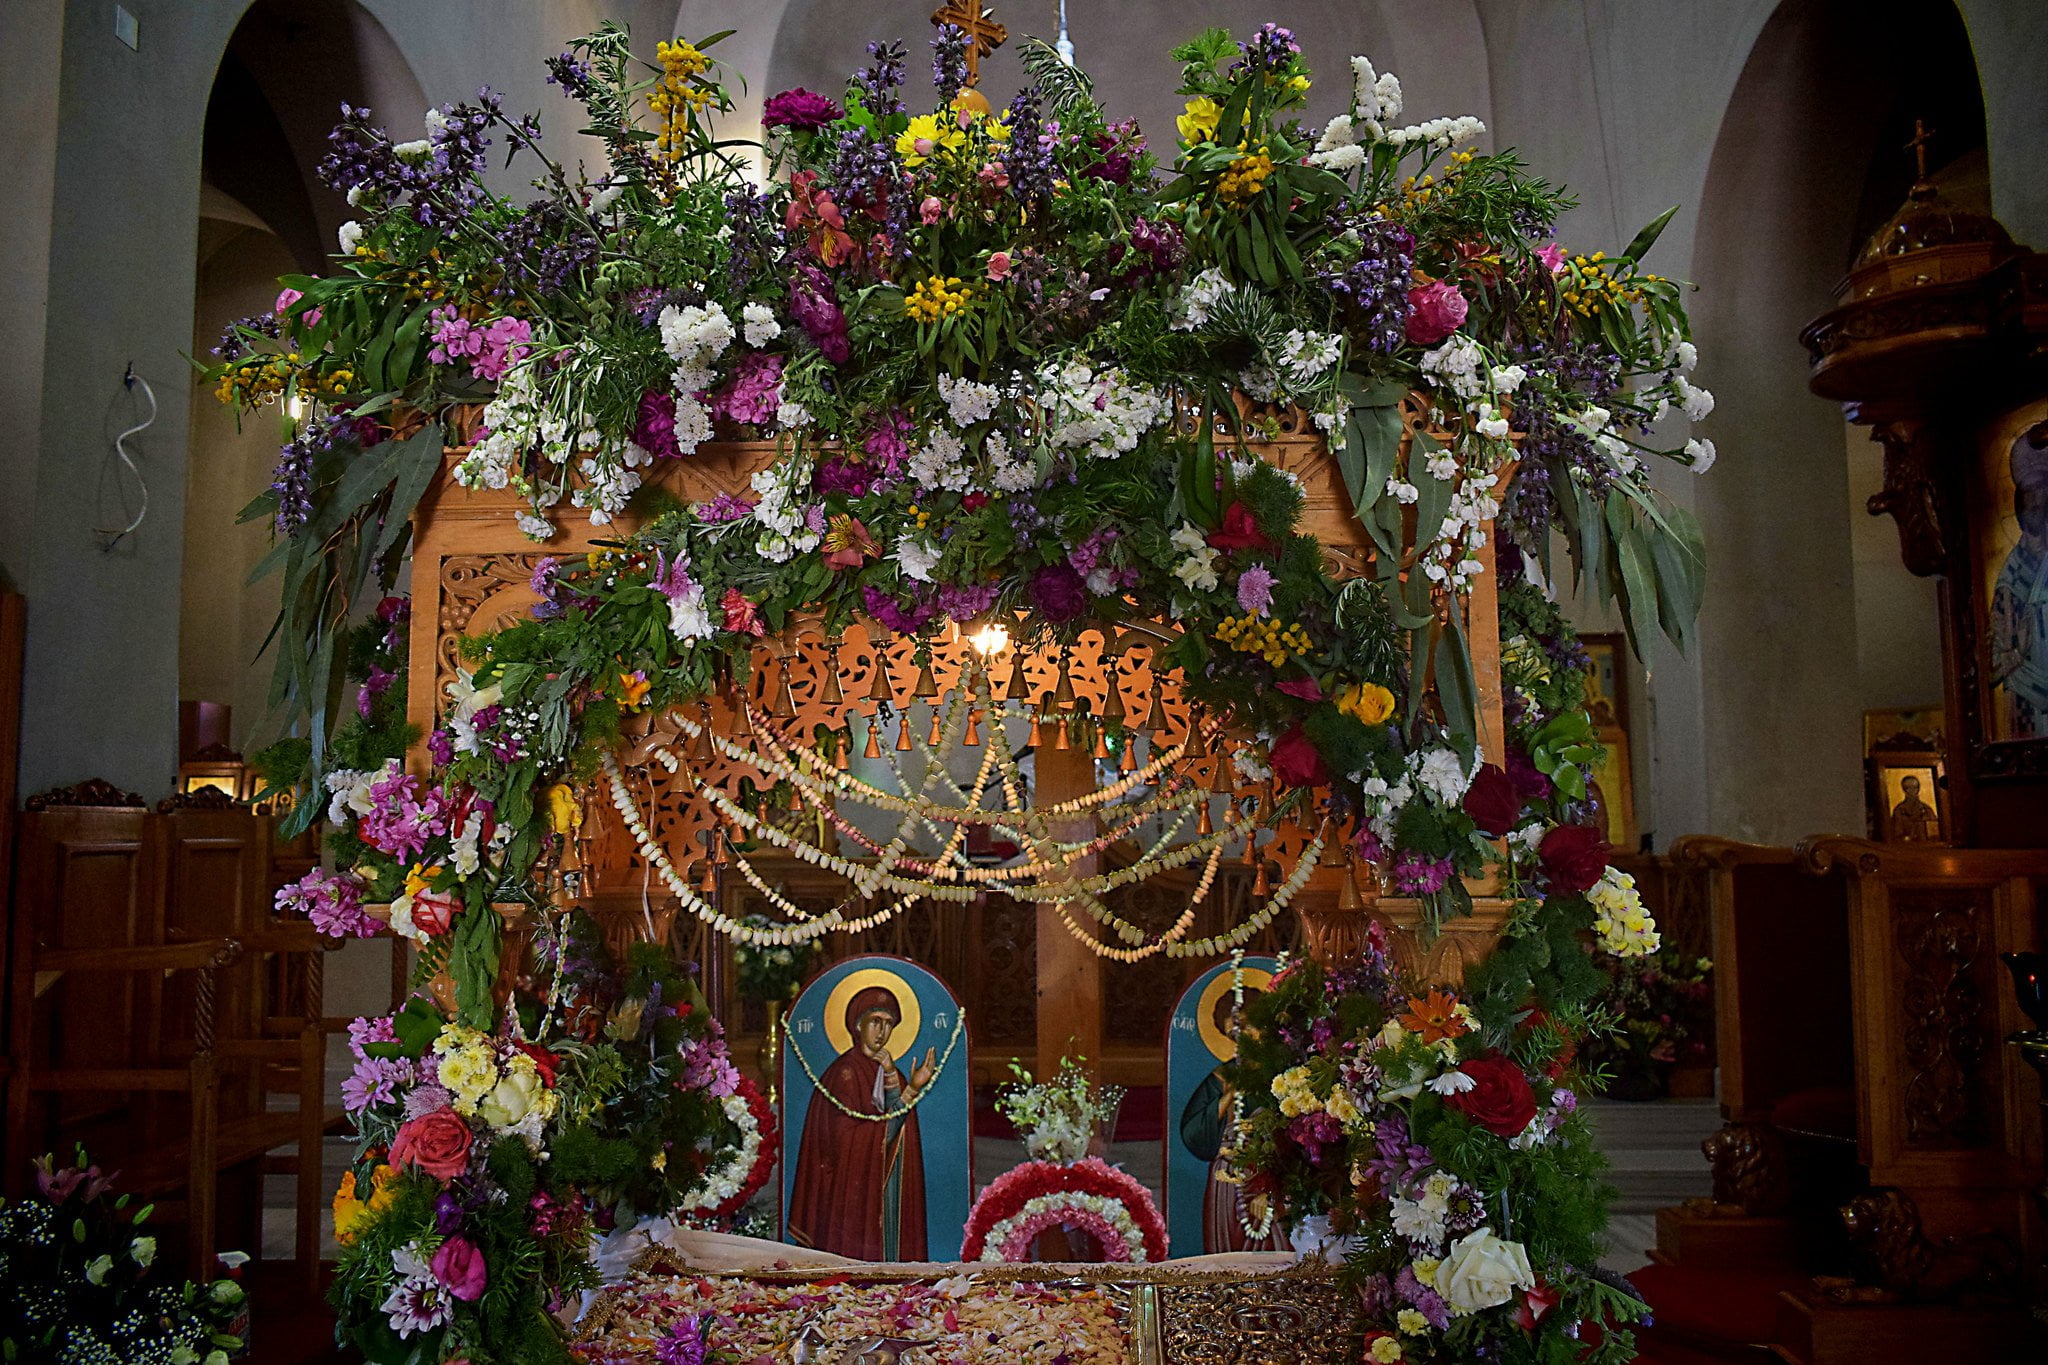 Epitaph decorated with Fresh Flowers - greek easter customs - blog